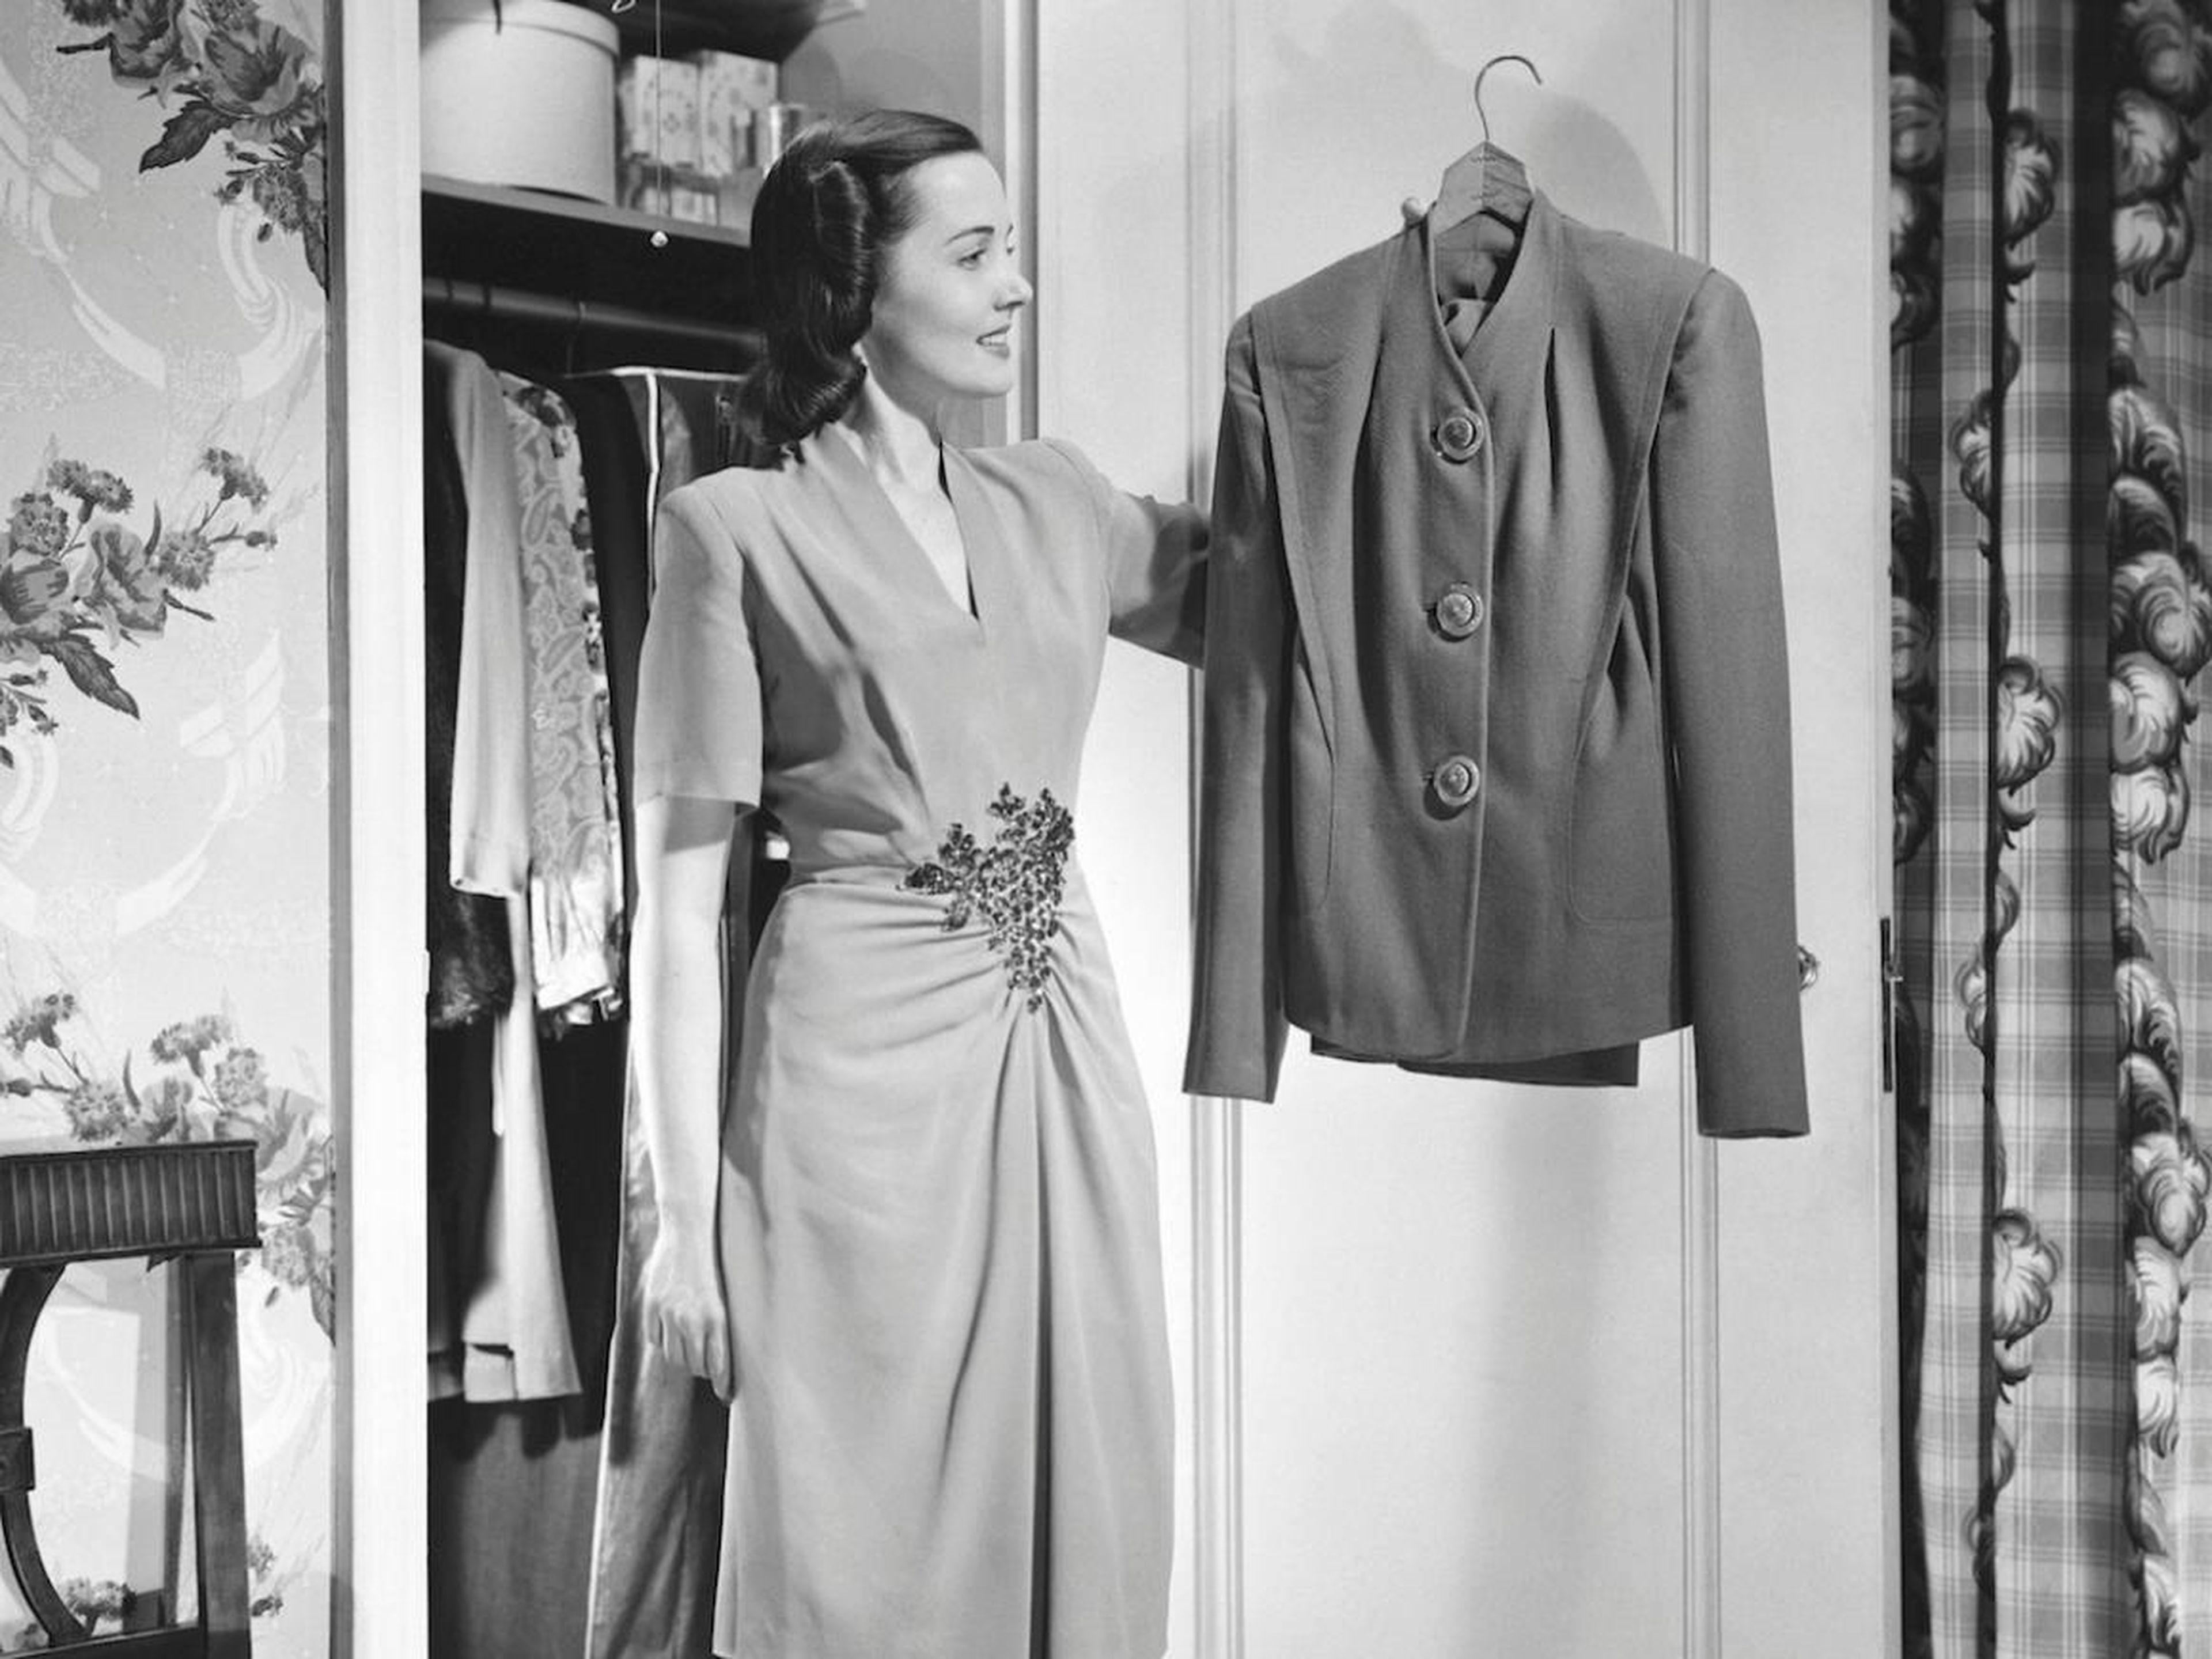 Meanwhile, the Youngs wrote that career women typically wore "tailored wool suits over silk blouses." Dresses were also an option for the office. The standard look was completed with hosiery or stockings, as well as shoes with